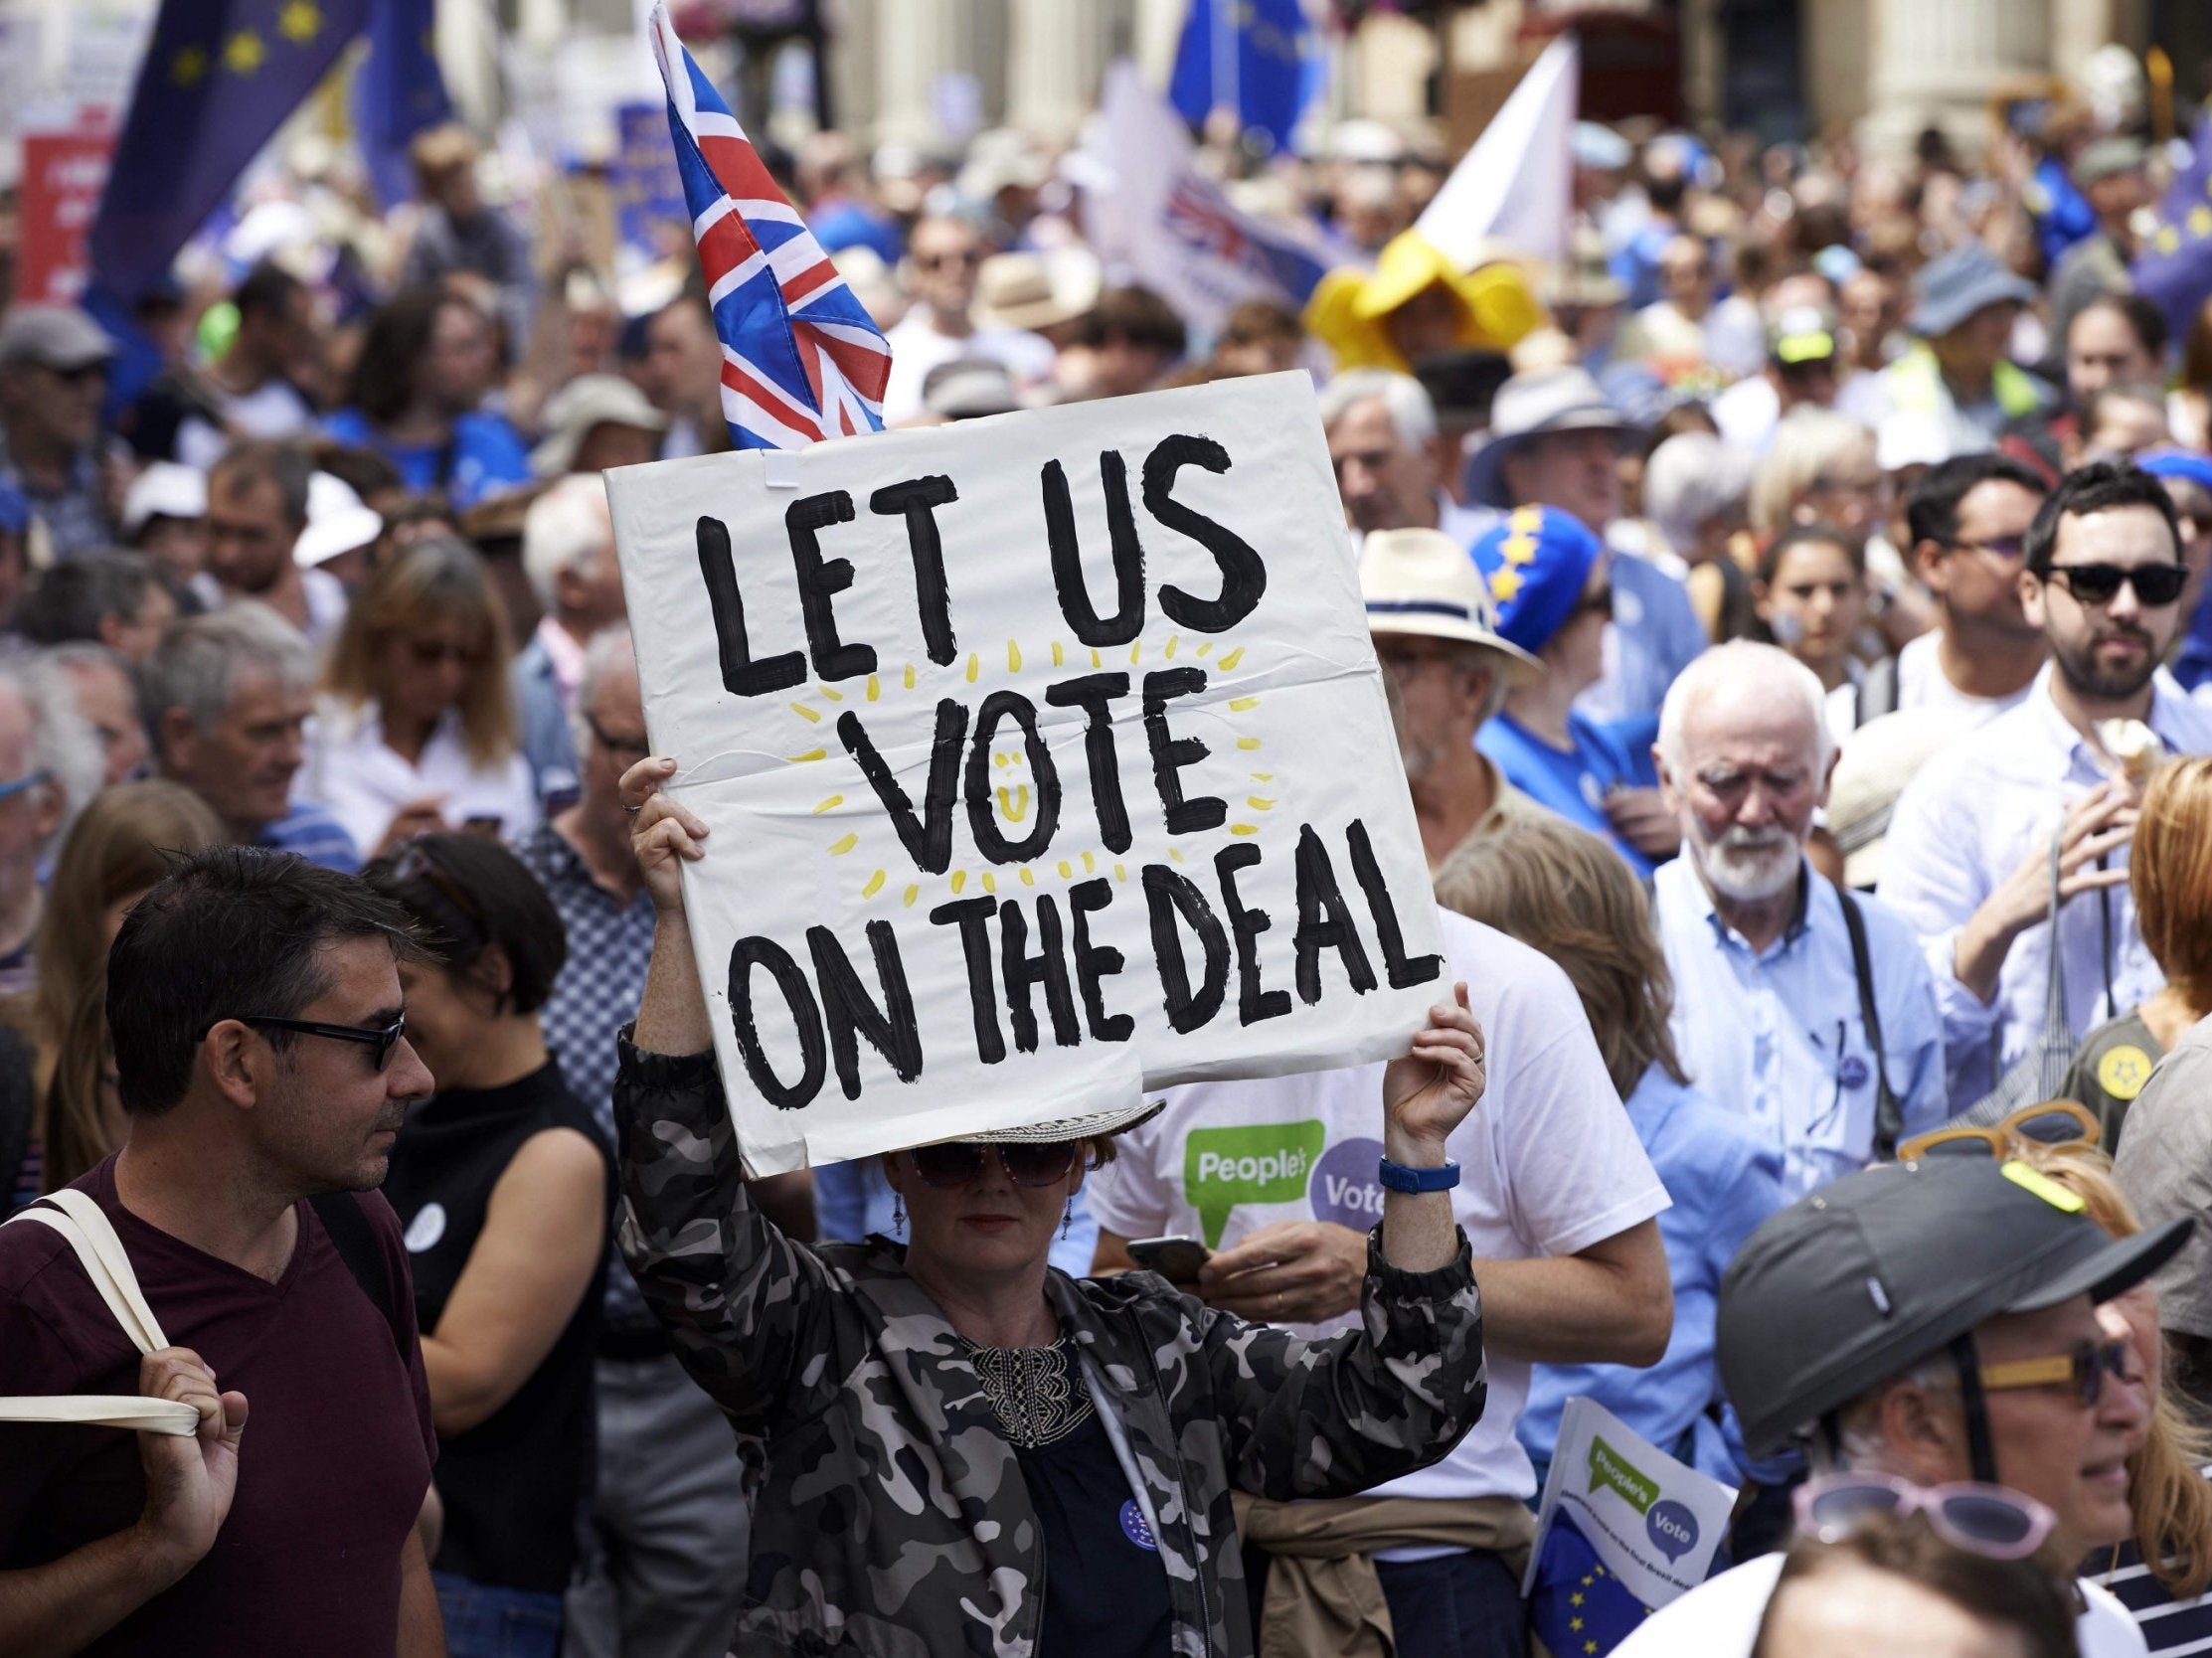 A second referendum almost certainly cannot happen unless Article 50 is extended or revoked